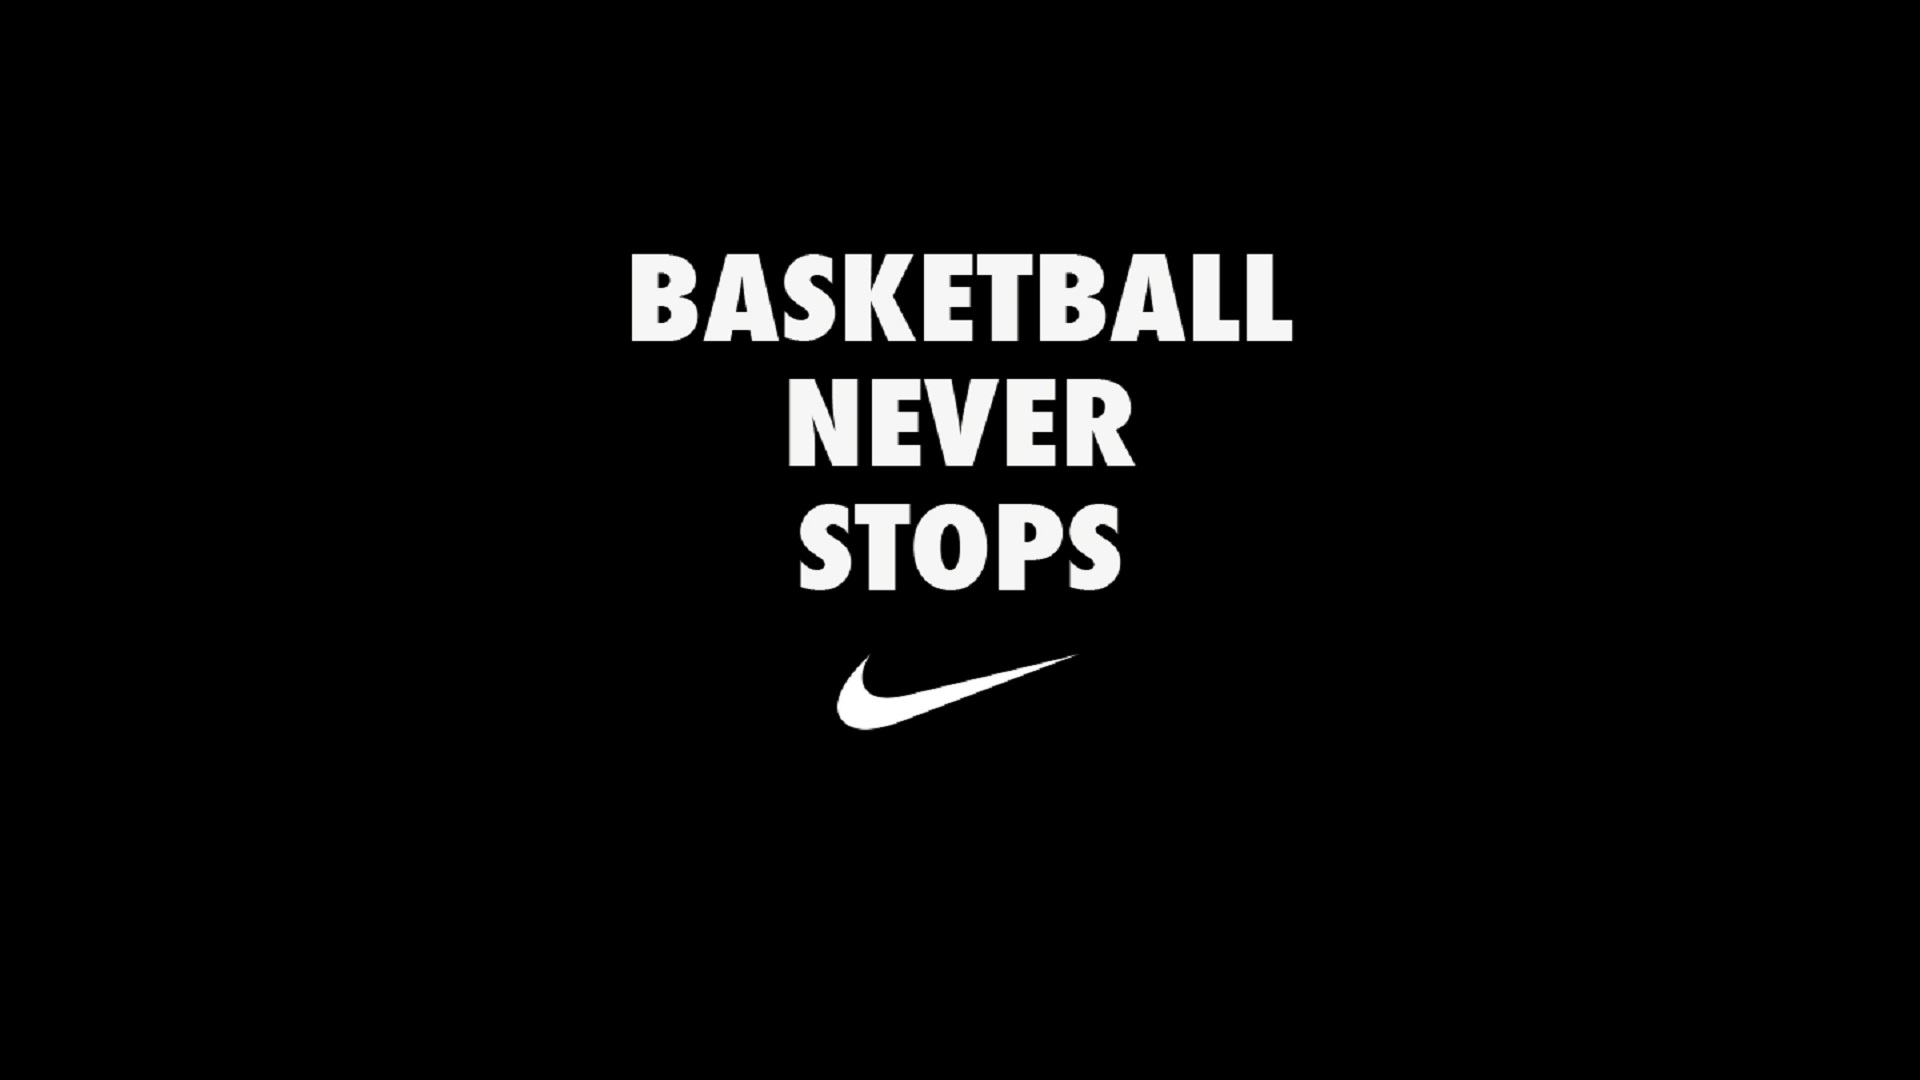 Basketball quotes wallpapers